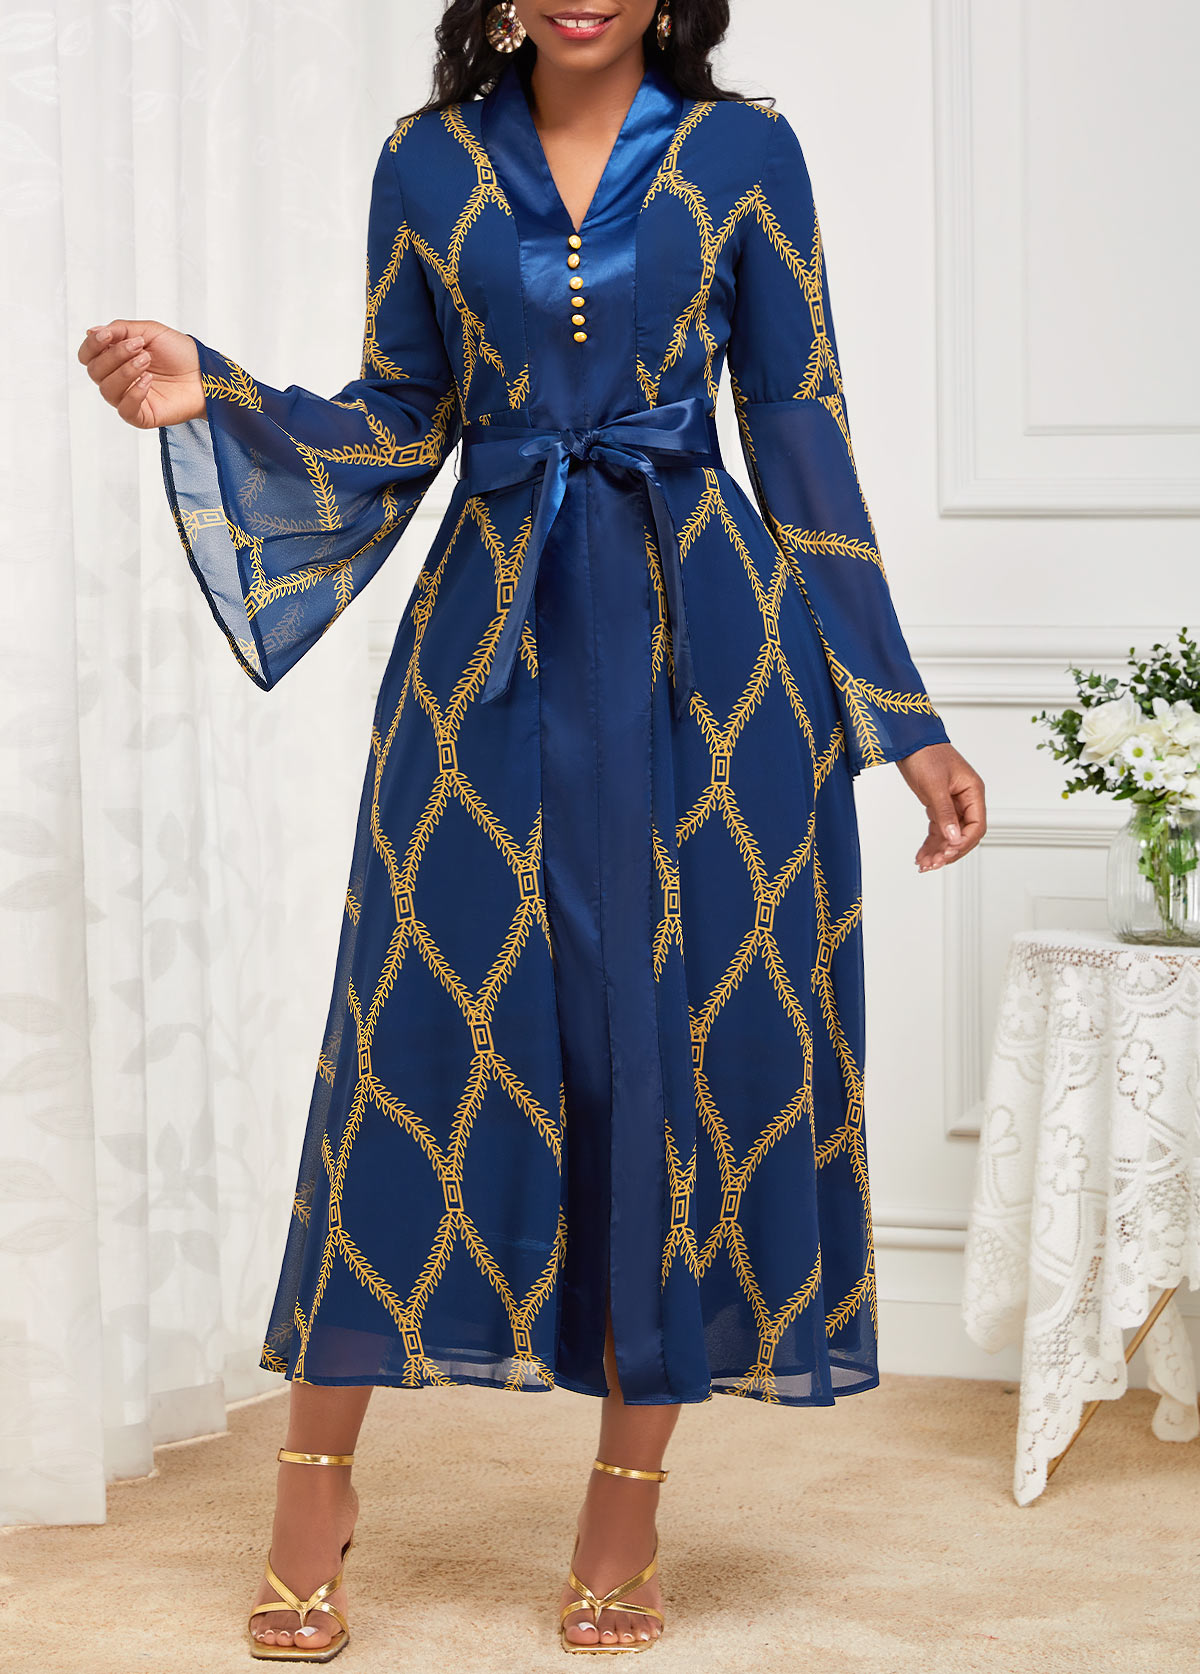 Tribal Print Patchwork Belted Navy New Year Dress